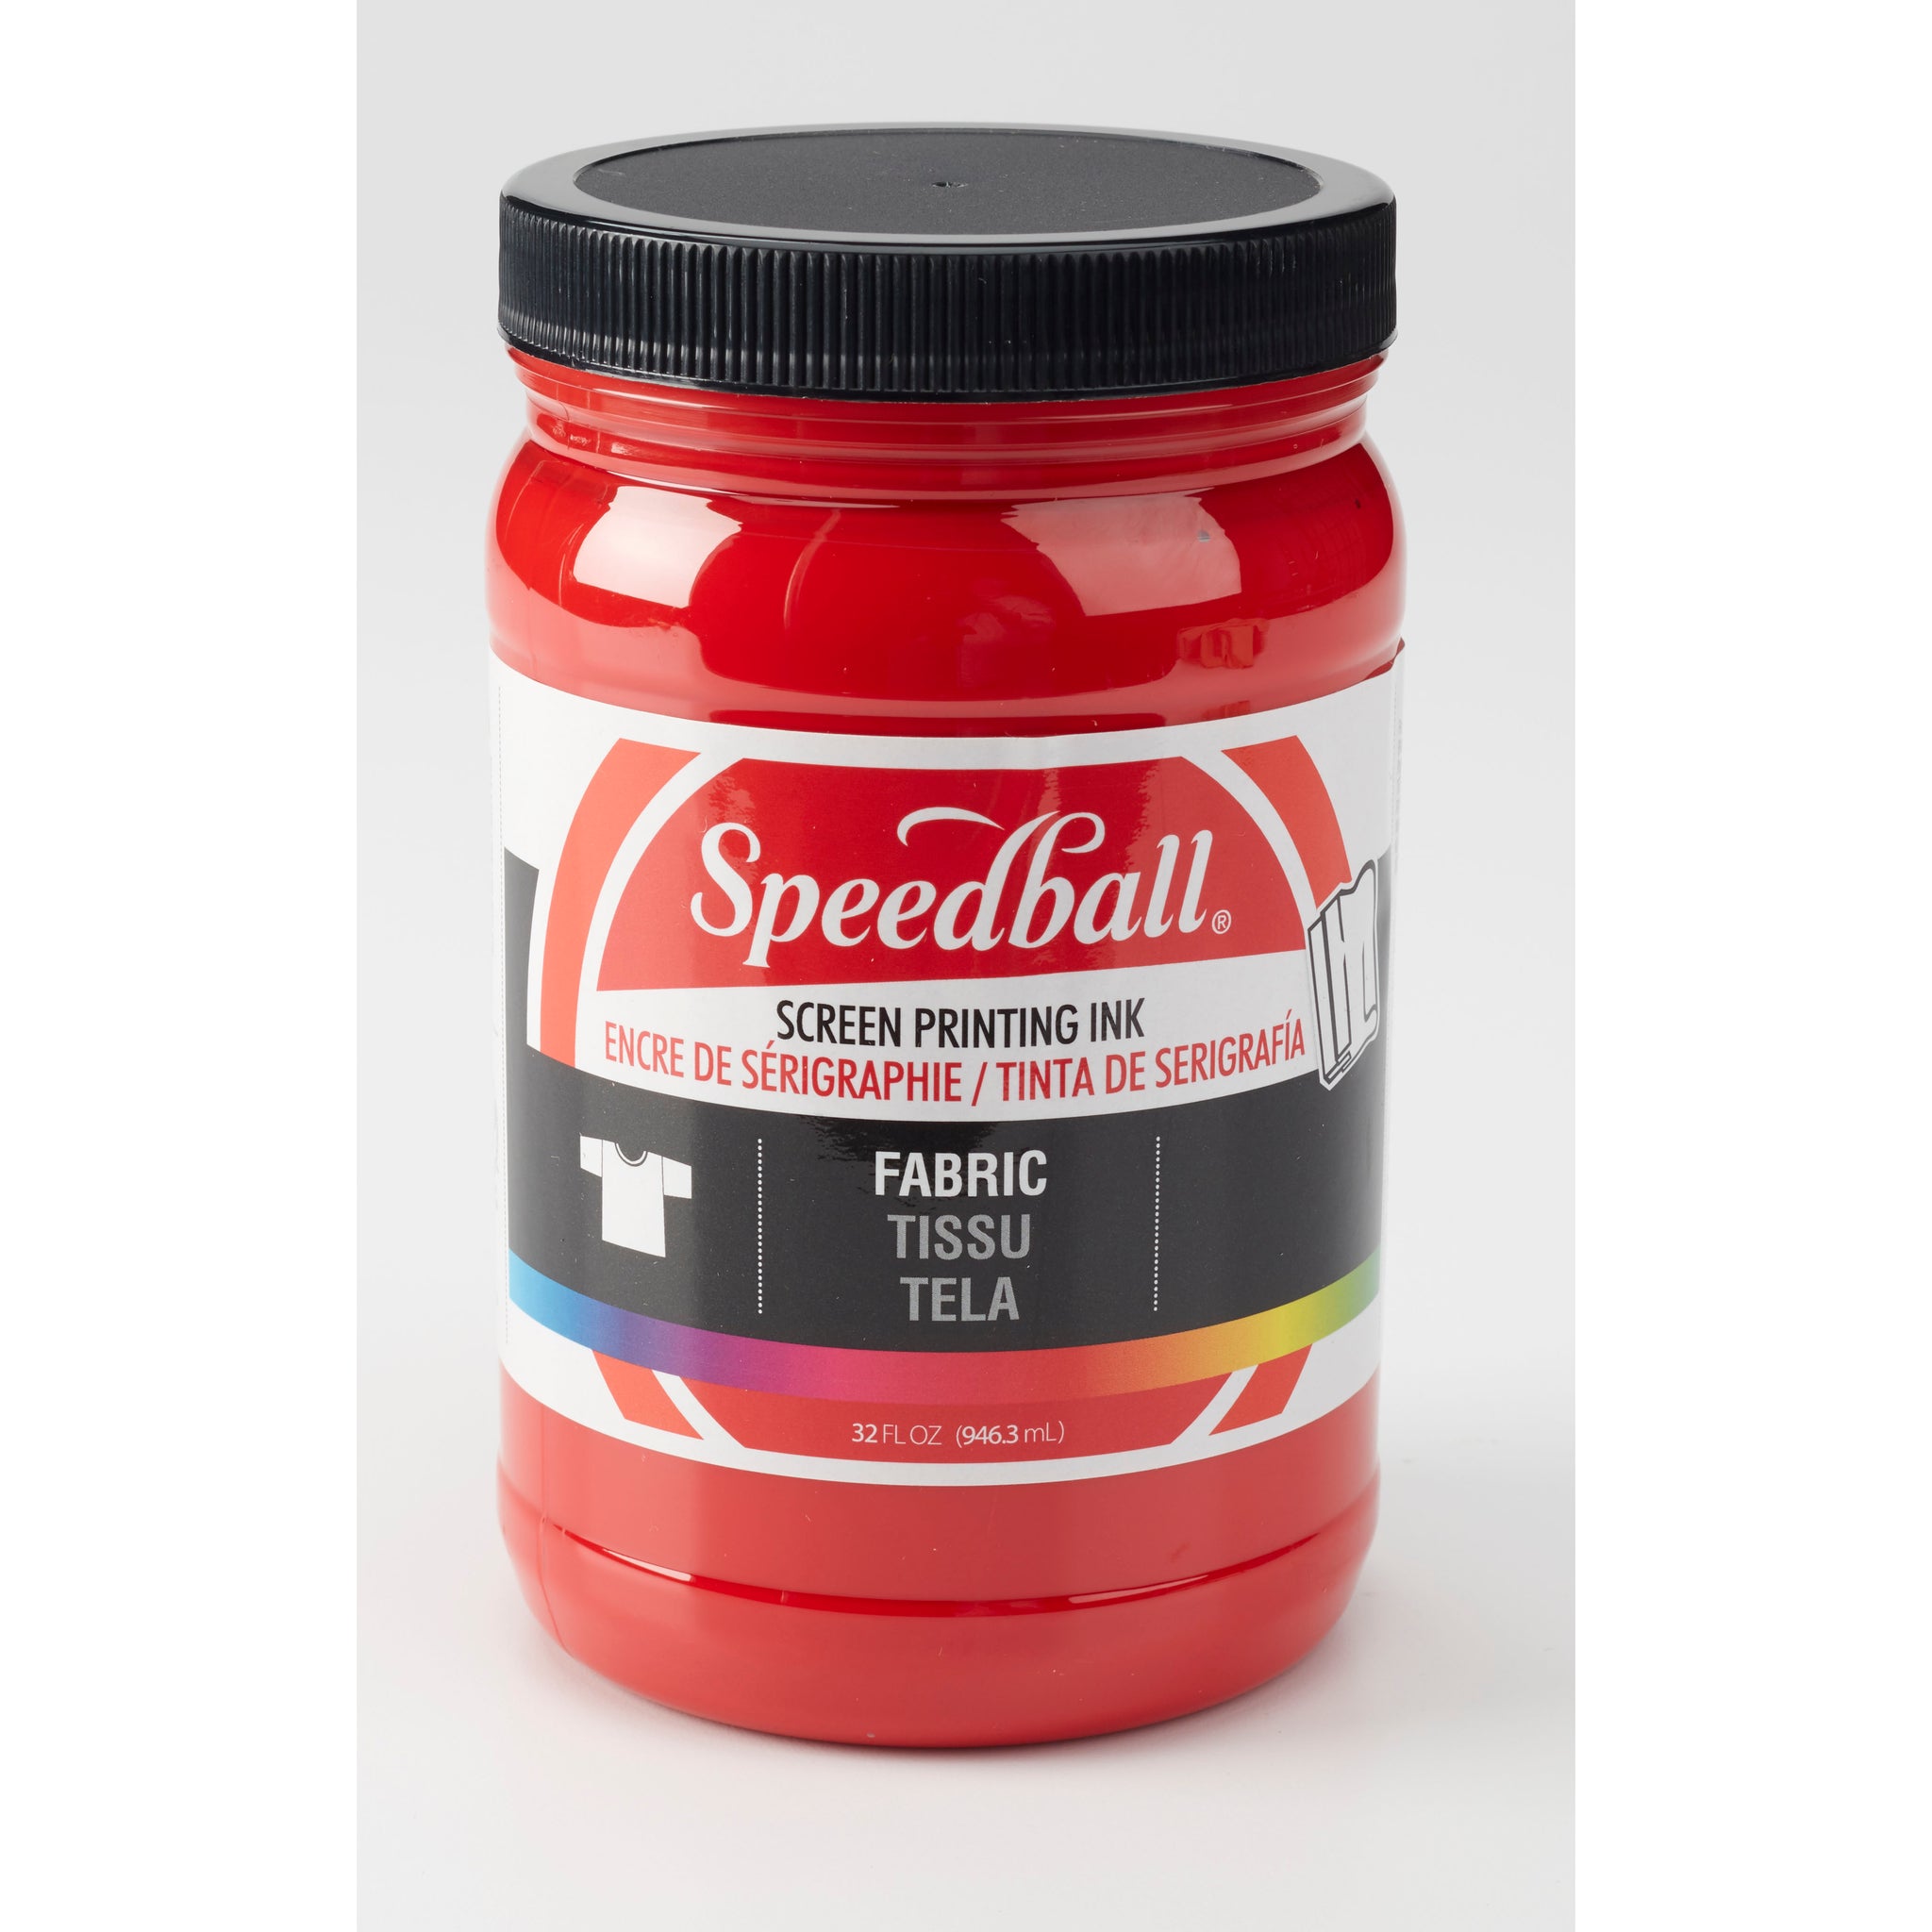 Screen Printing Ink Fabric 32oz Red